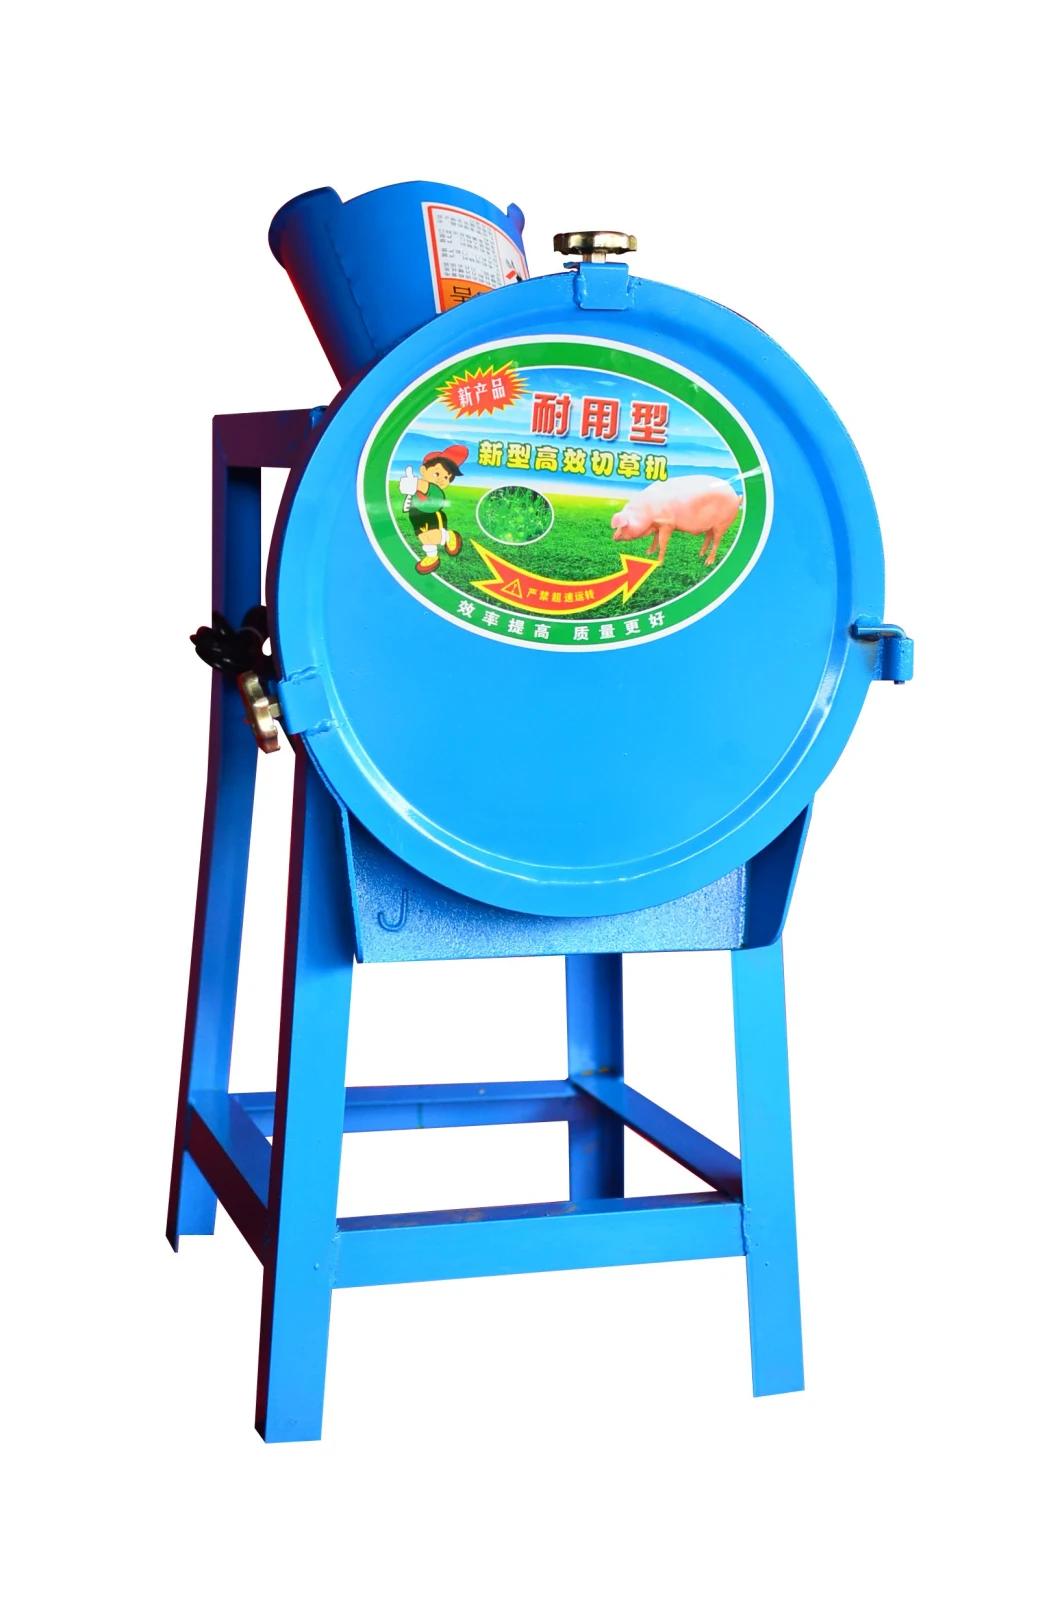 Magical Agricultural Machinery Fodder Cutter Machine for Farm Animal Feeding for Sale